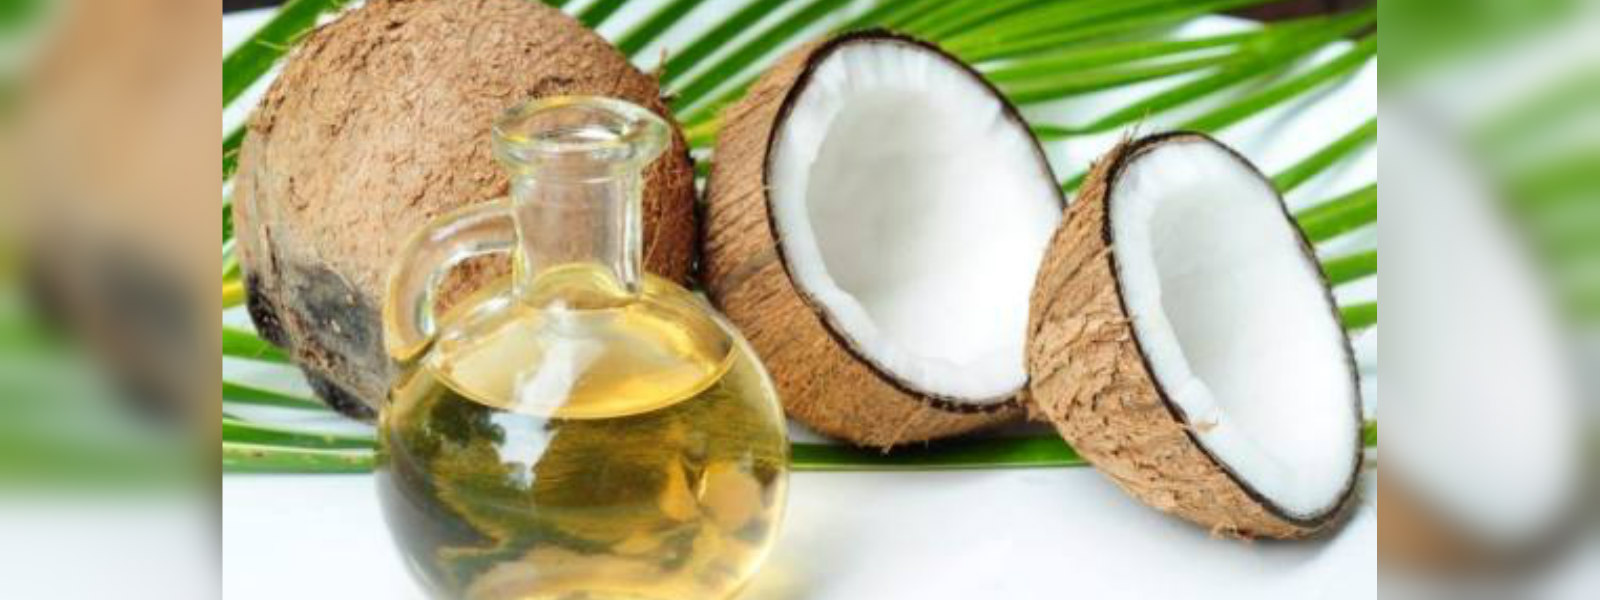 Production of coconut oil to increase by 50%